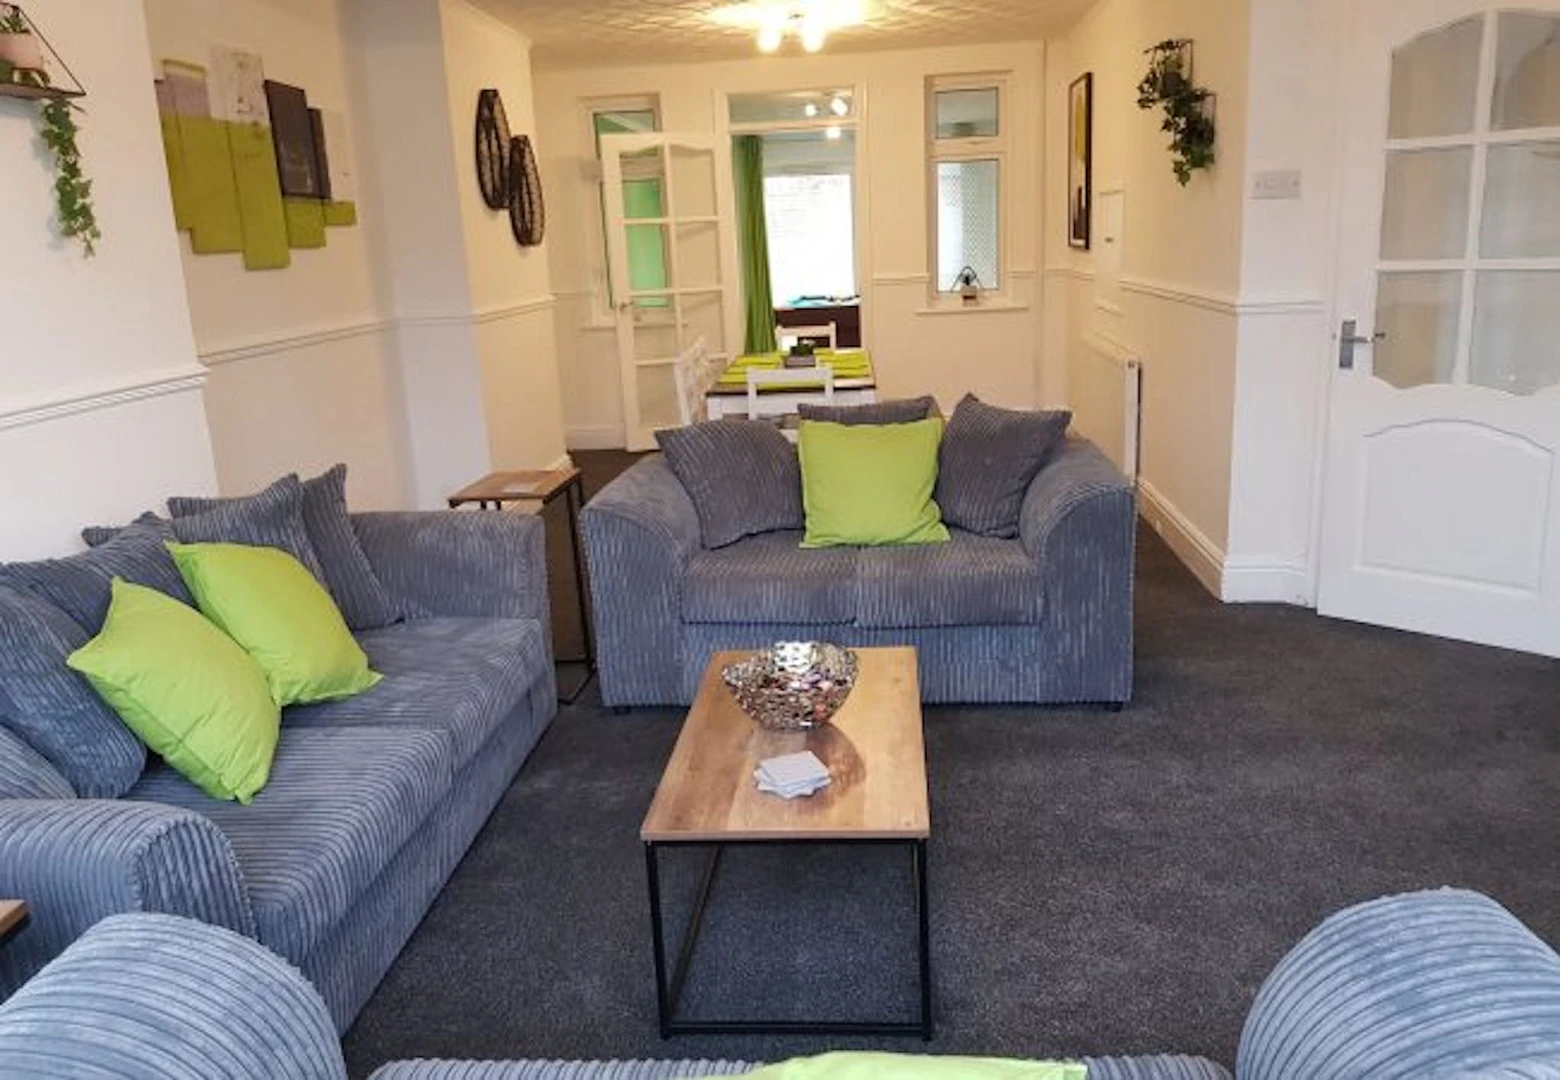 Accommodation in the centre of Coventry